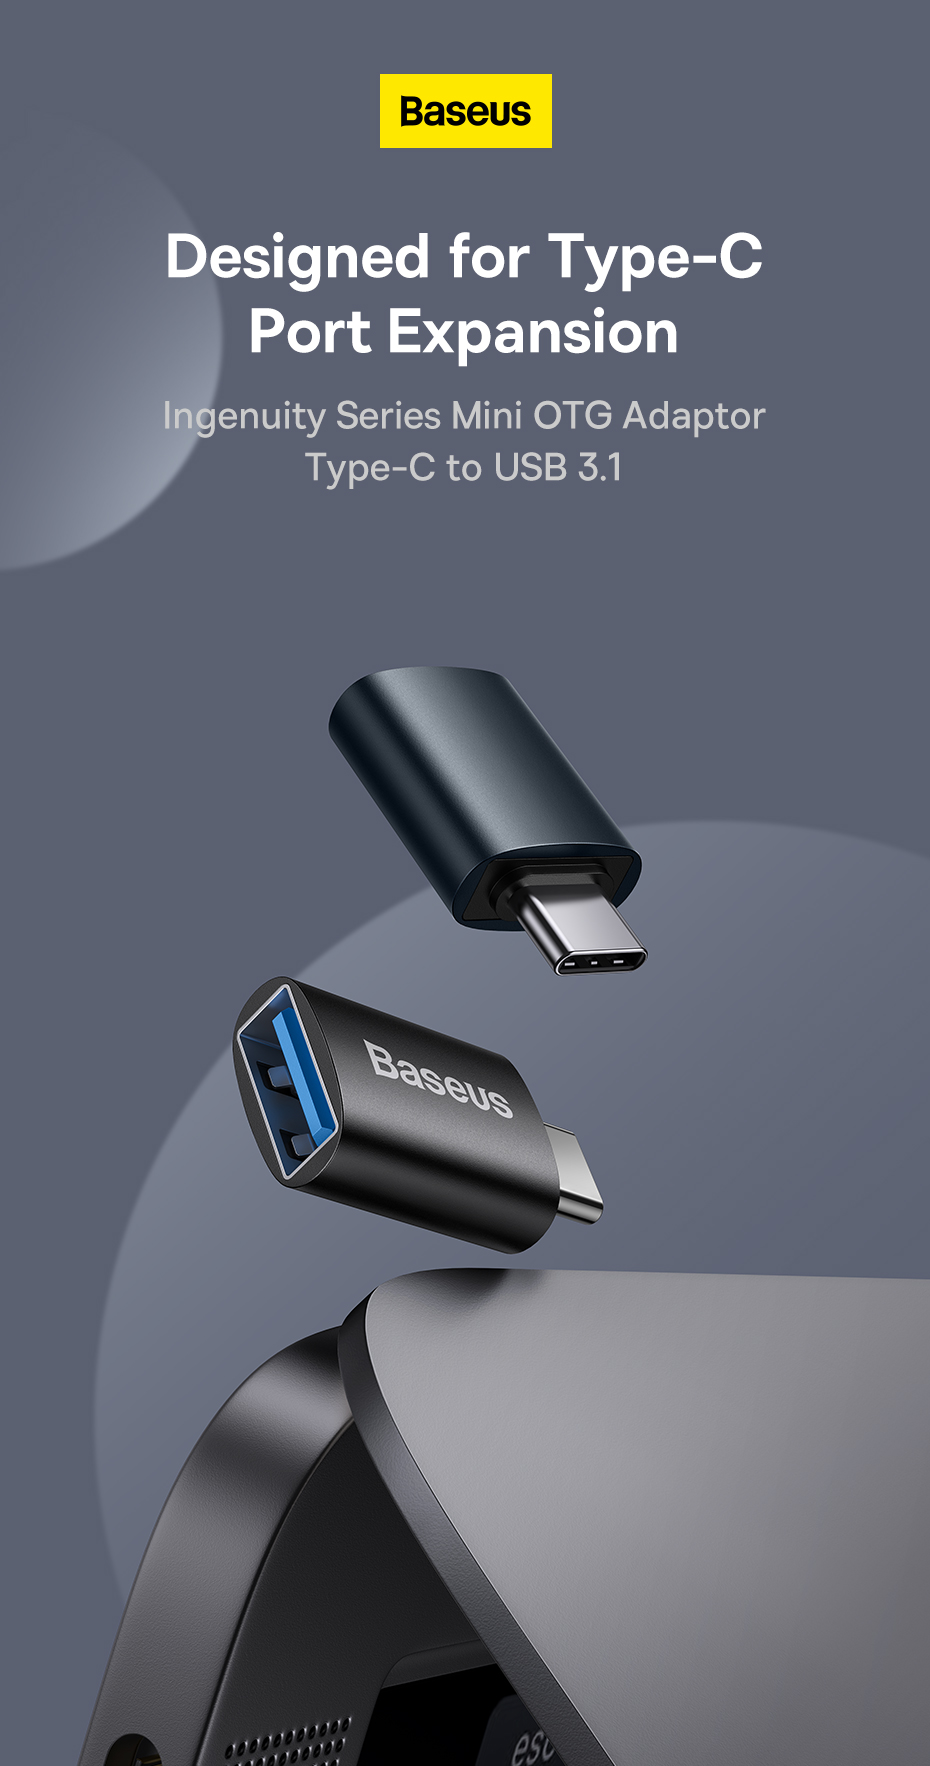 Baseus-USB-C-Male-to-USB31-Female-Adapter-10Gbps-Speed-Transfer-Connector-For-XIAOMI-Mi12-For-Samsun-1930180-1